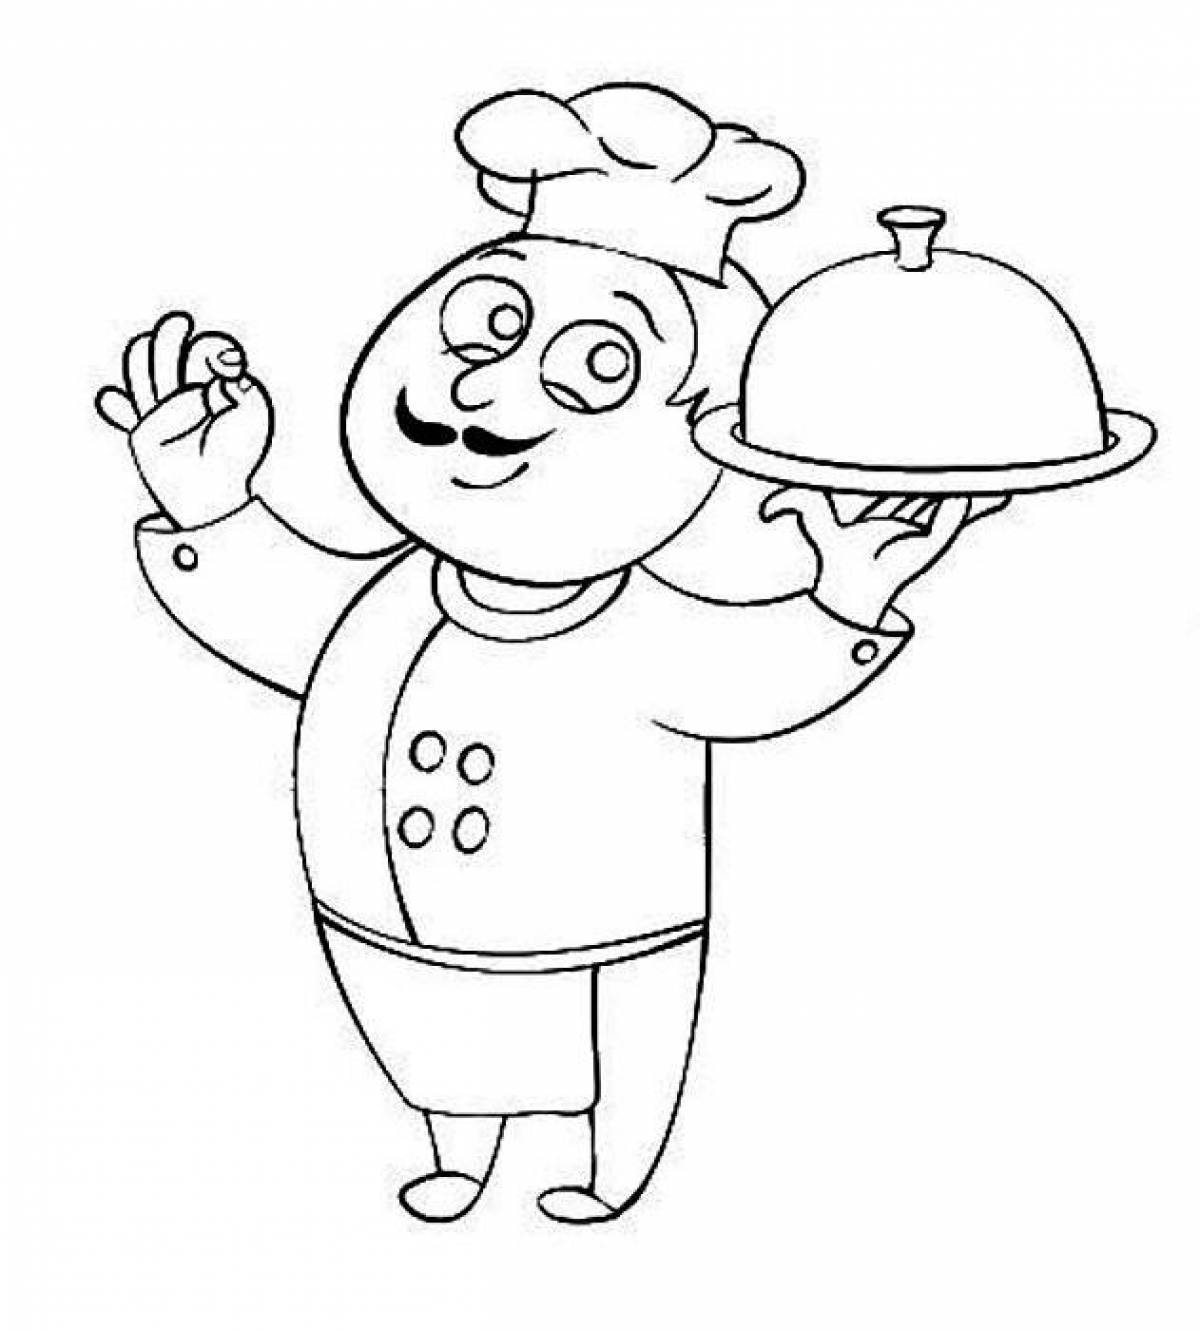 Colorful chef coloring page for kids